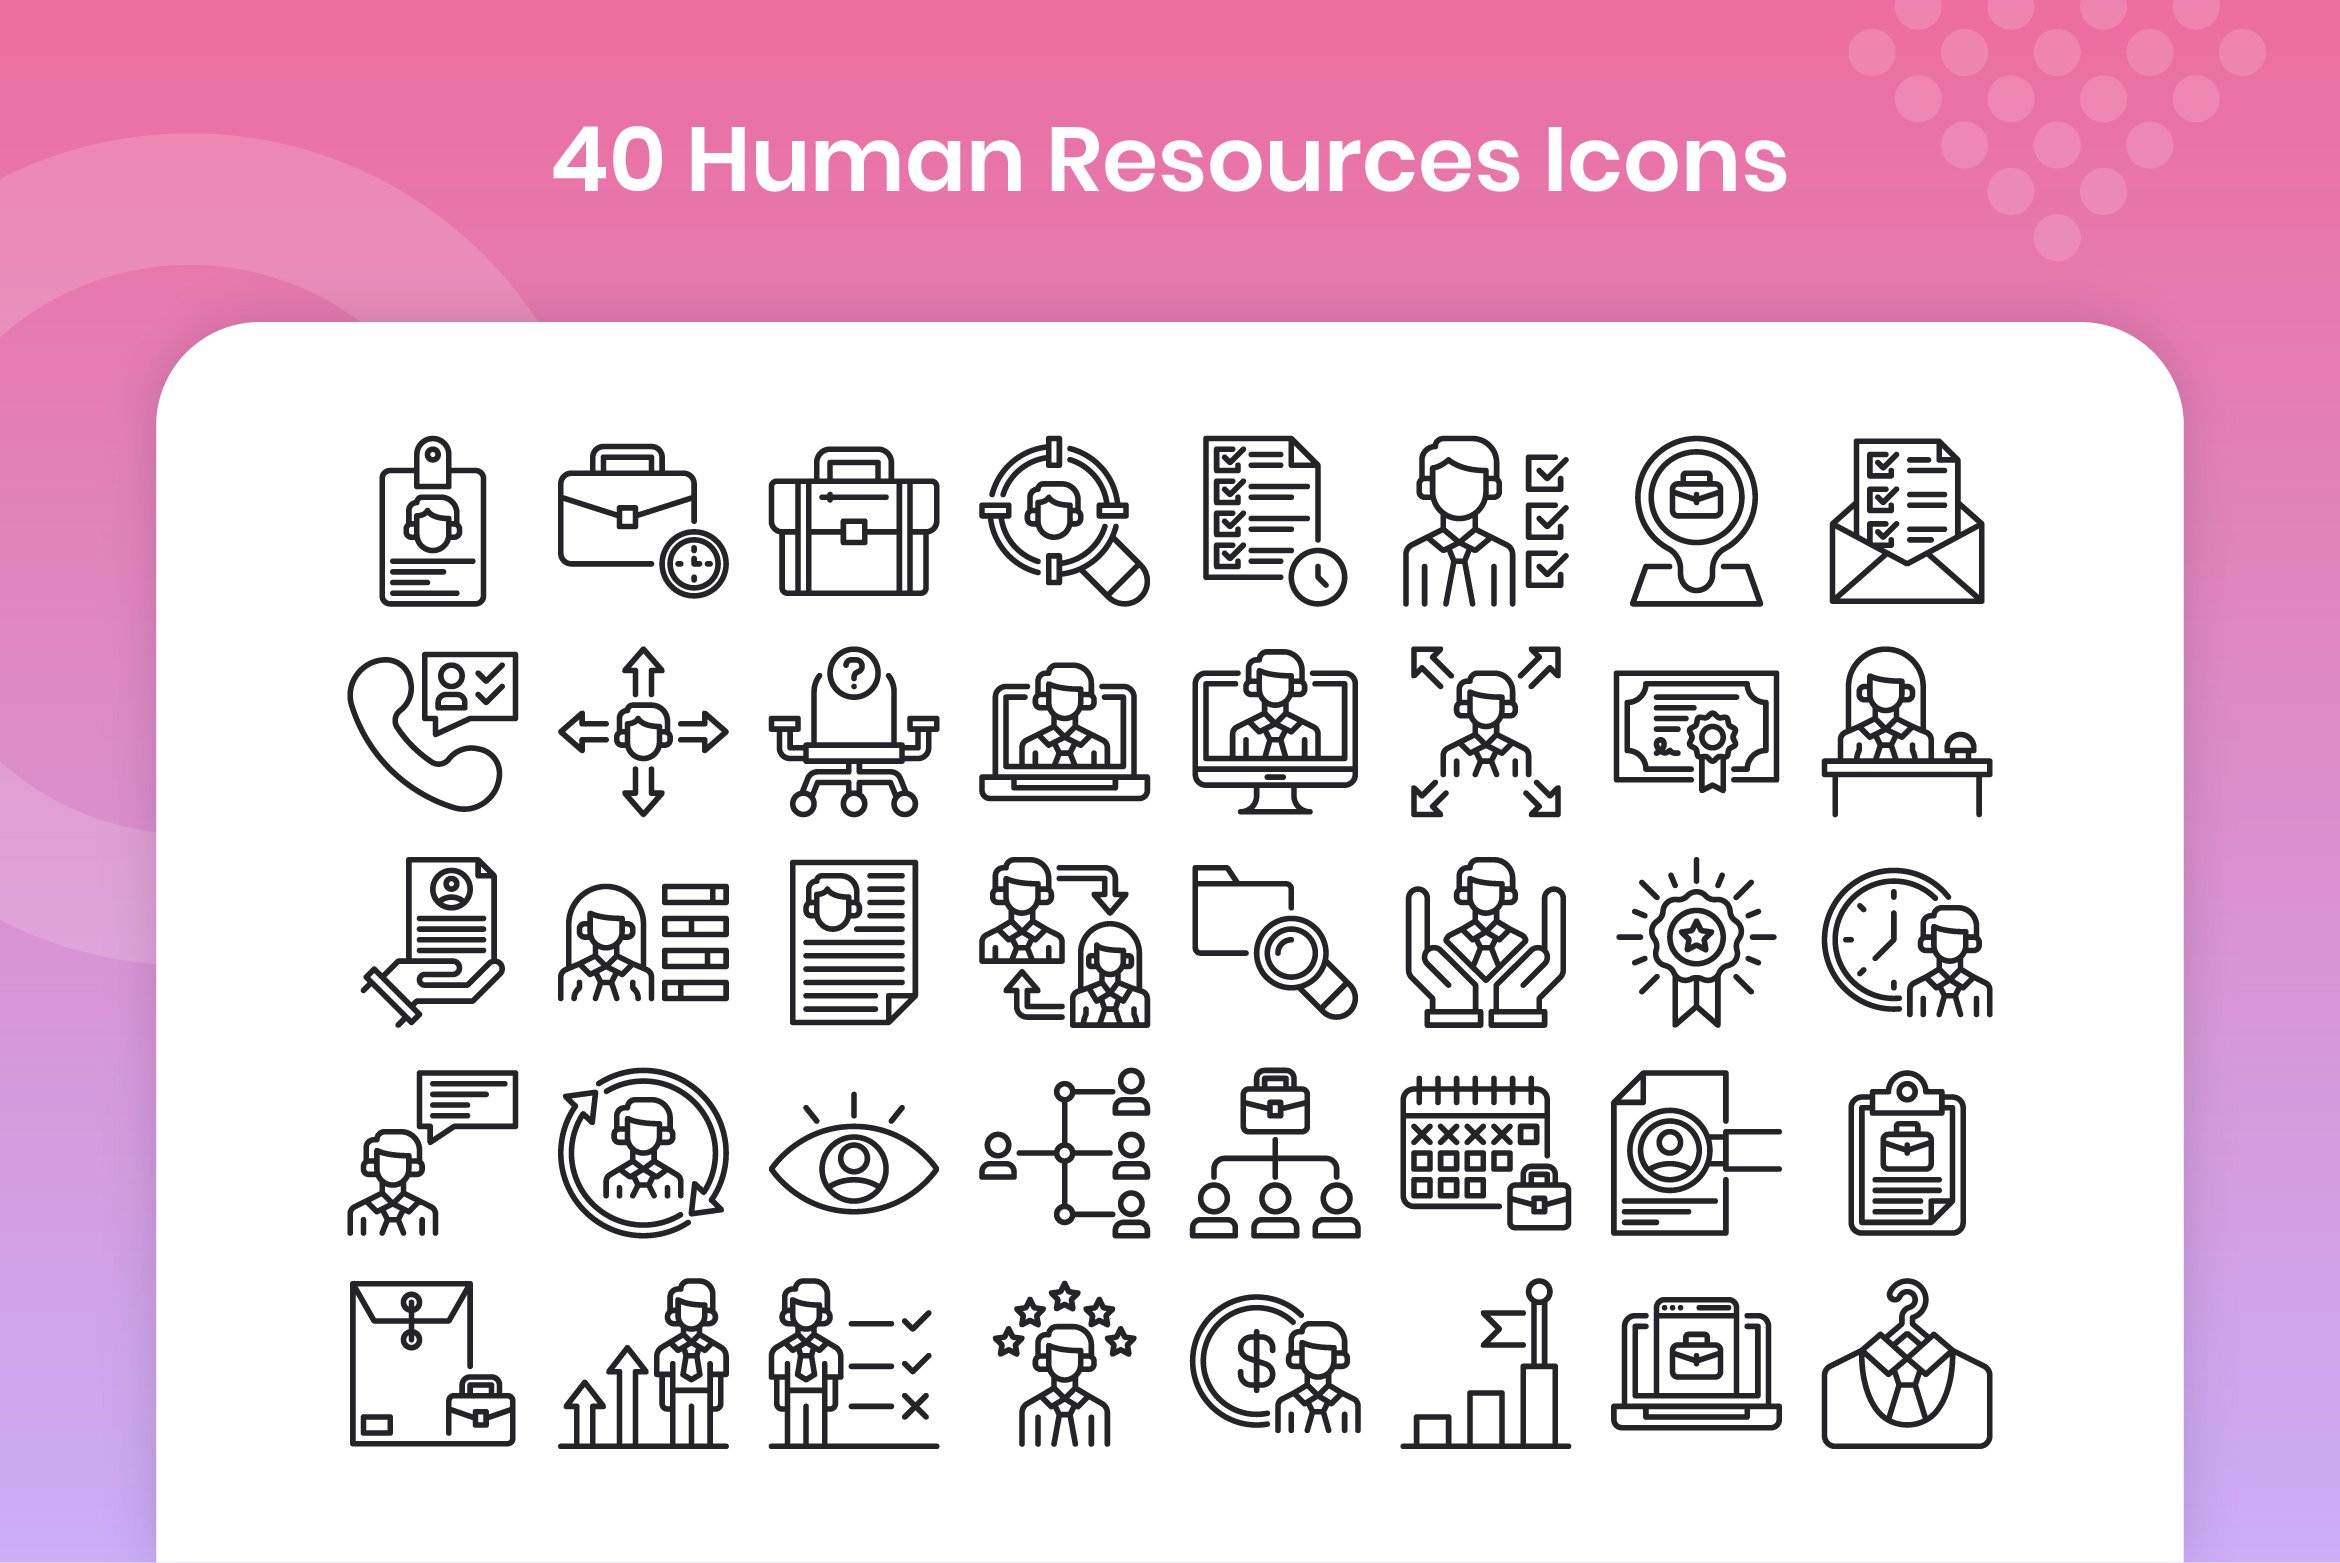 40 Human Resources - Line preview image.